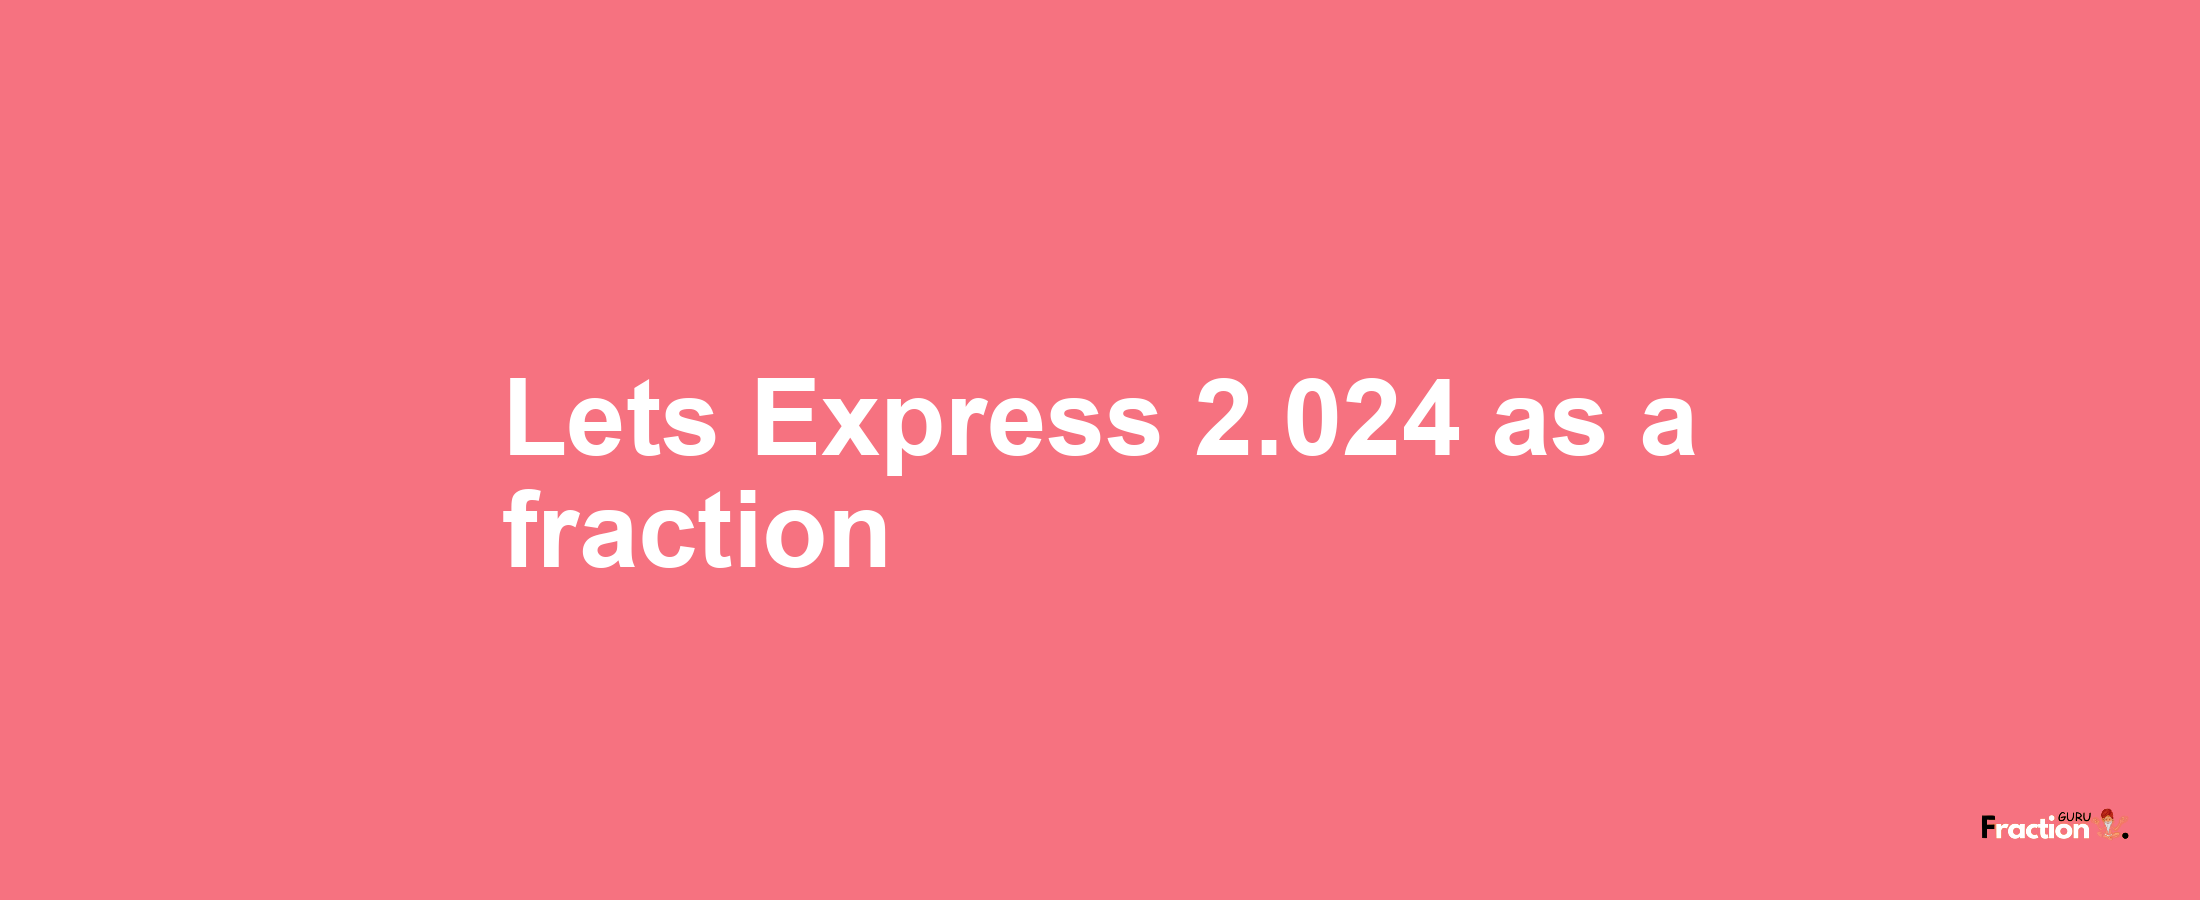 Lets Express 2.024 as afraction